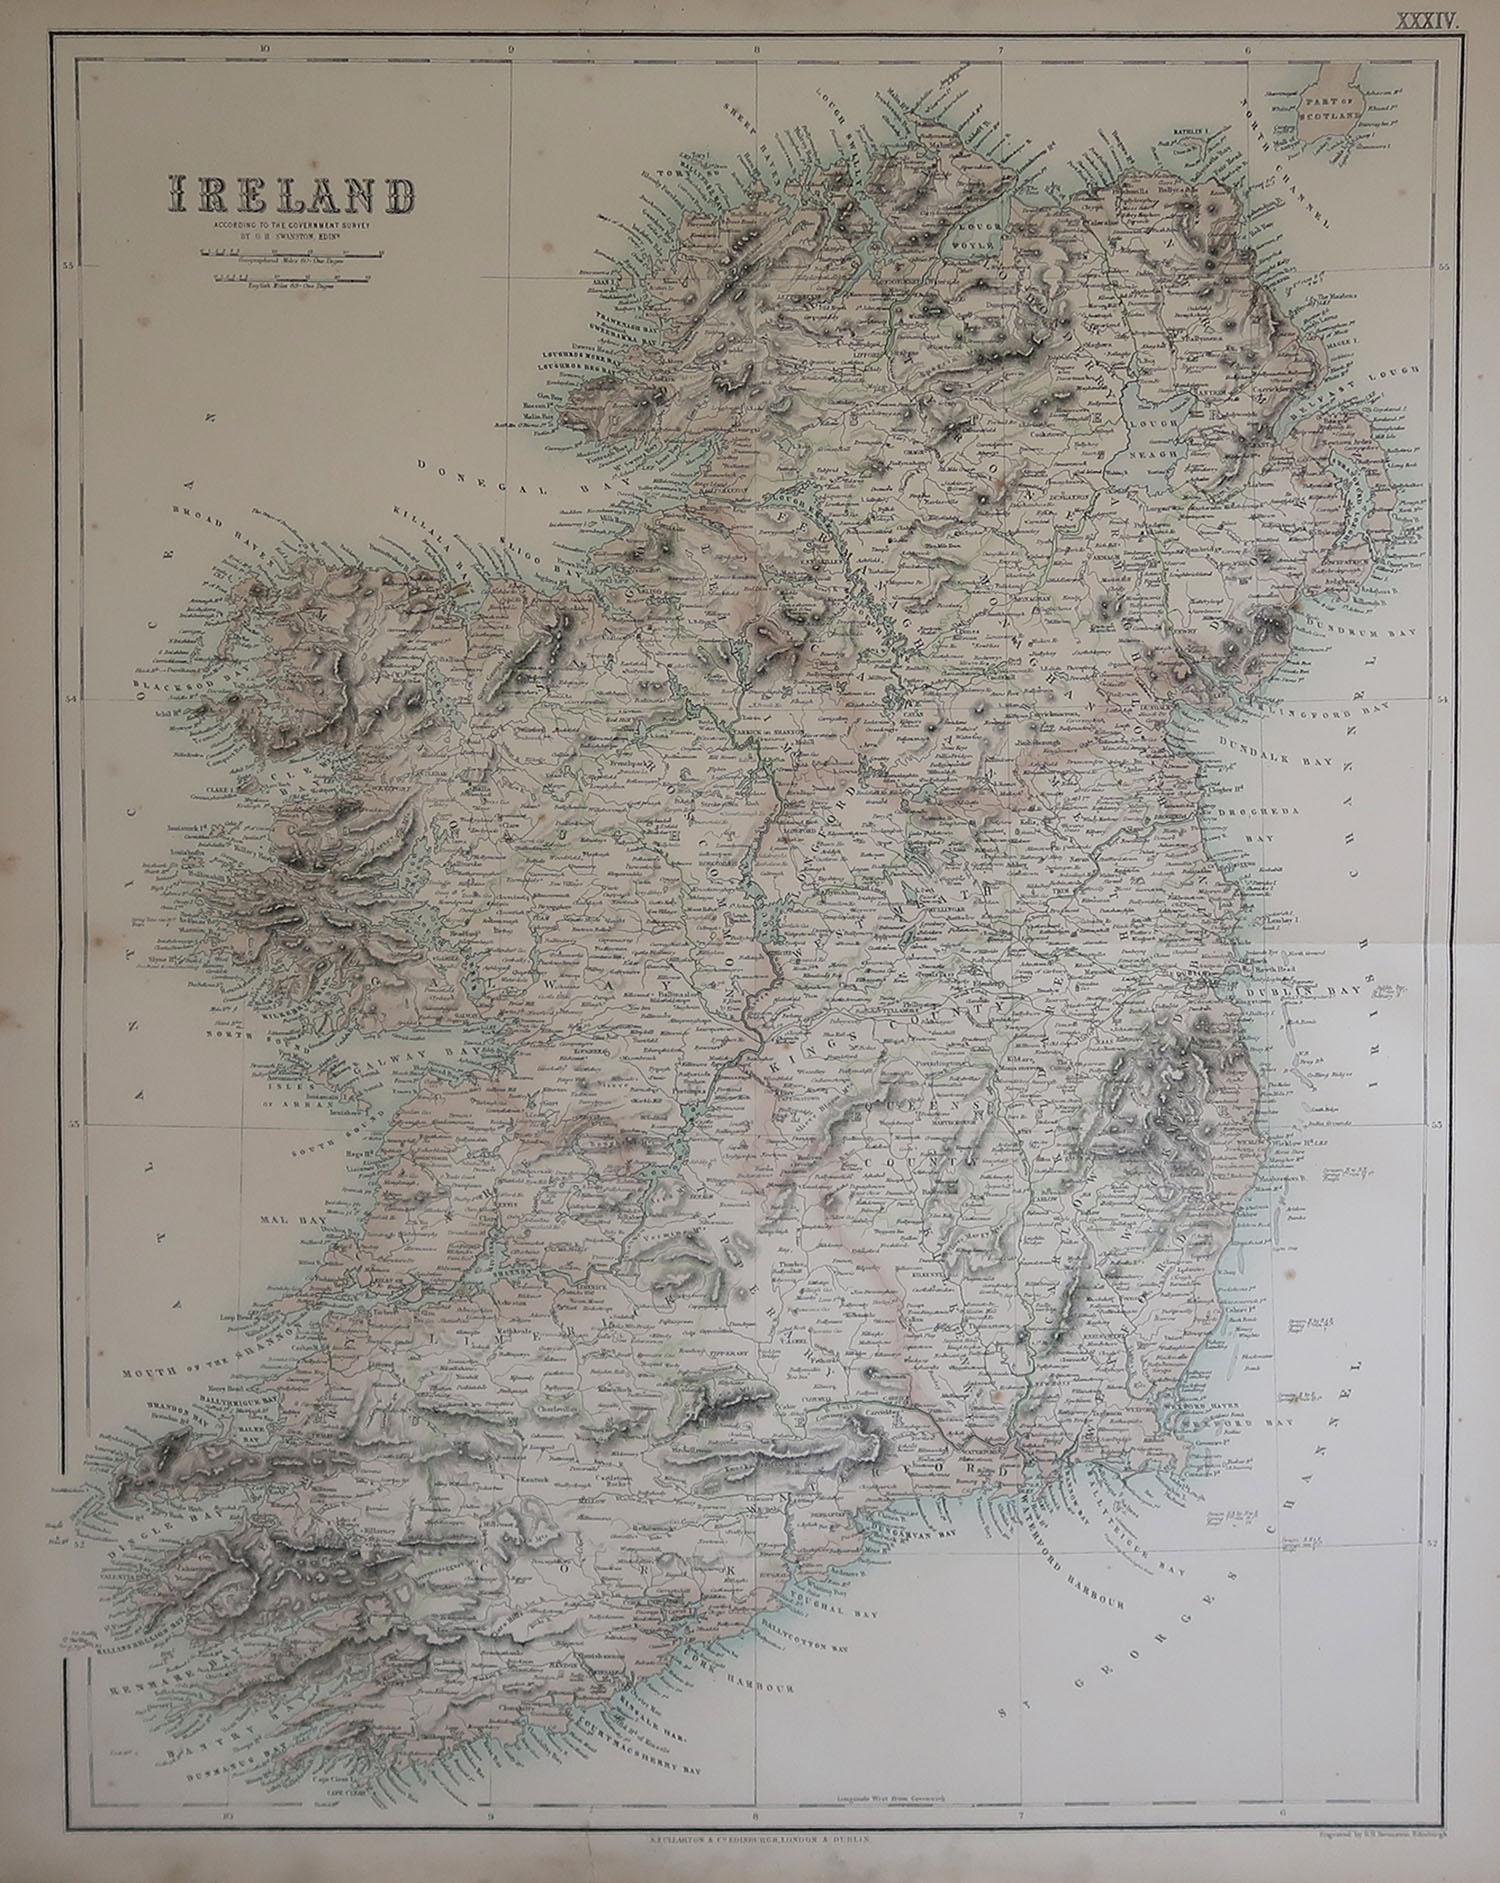 Great map of Ireland

From the celebrated Royal Illustrated Atlas

Lithograph. Original color. 

Published by Fullarton, Edinburgh. C.1870

Repair to a small edge tear on top margin

Unframed.












 